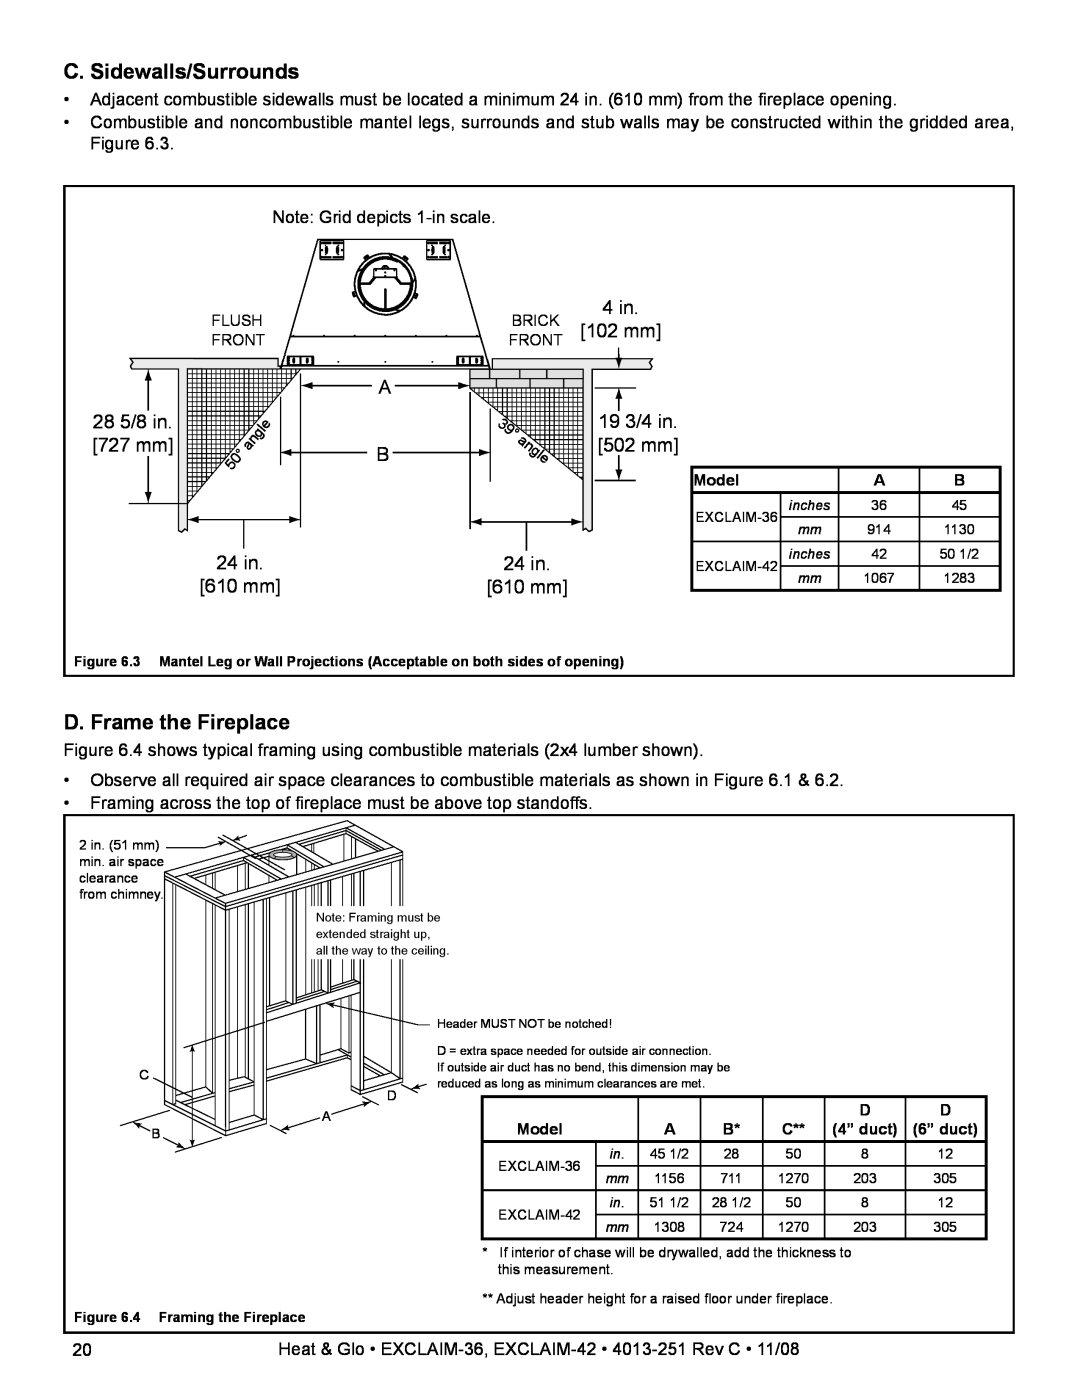 Hearth and Home Technologies EXCLAIM-36 C. Sidewalls/Surrounds, D. Frame the Fireplace, 4 in, 102 mm, 28 5/8 in 727 mm 